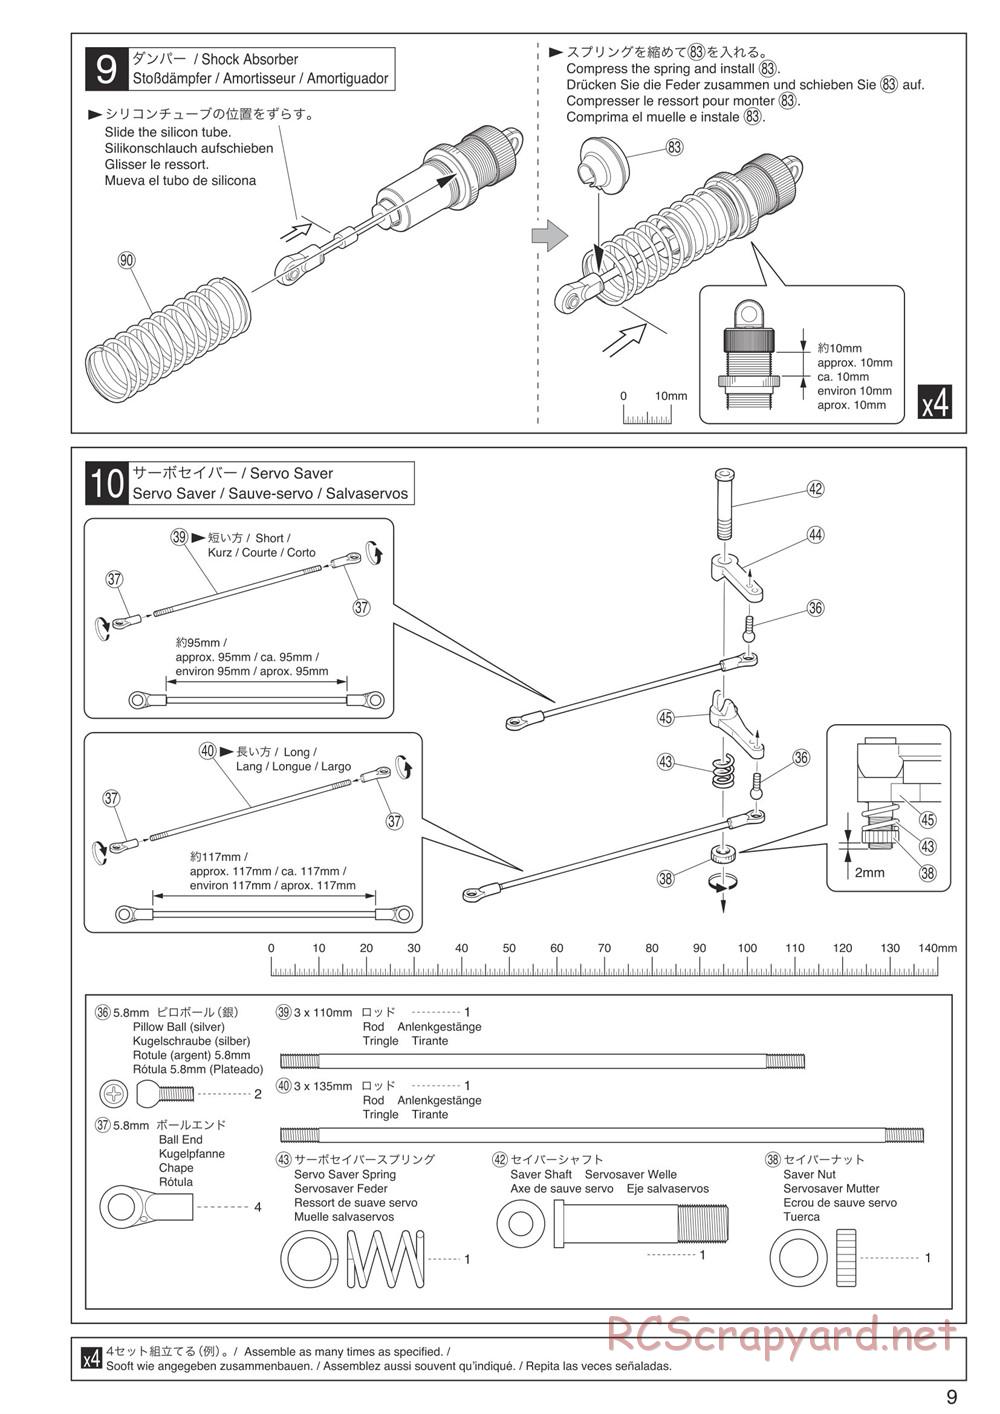 Kyosho - FO-XX VE 2.0 - Manual - Page 9